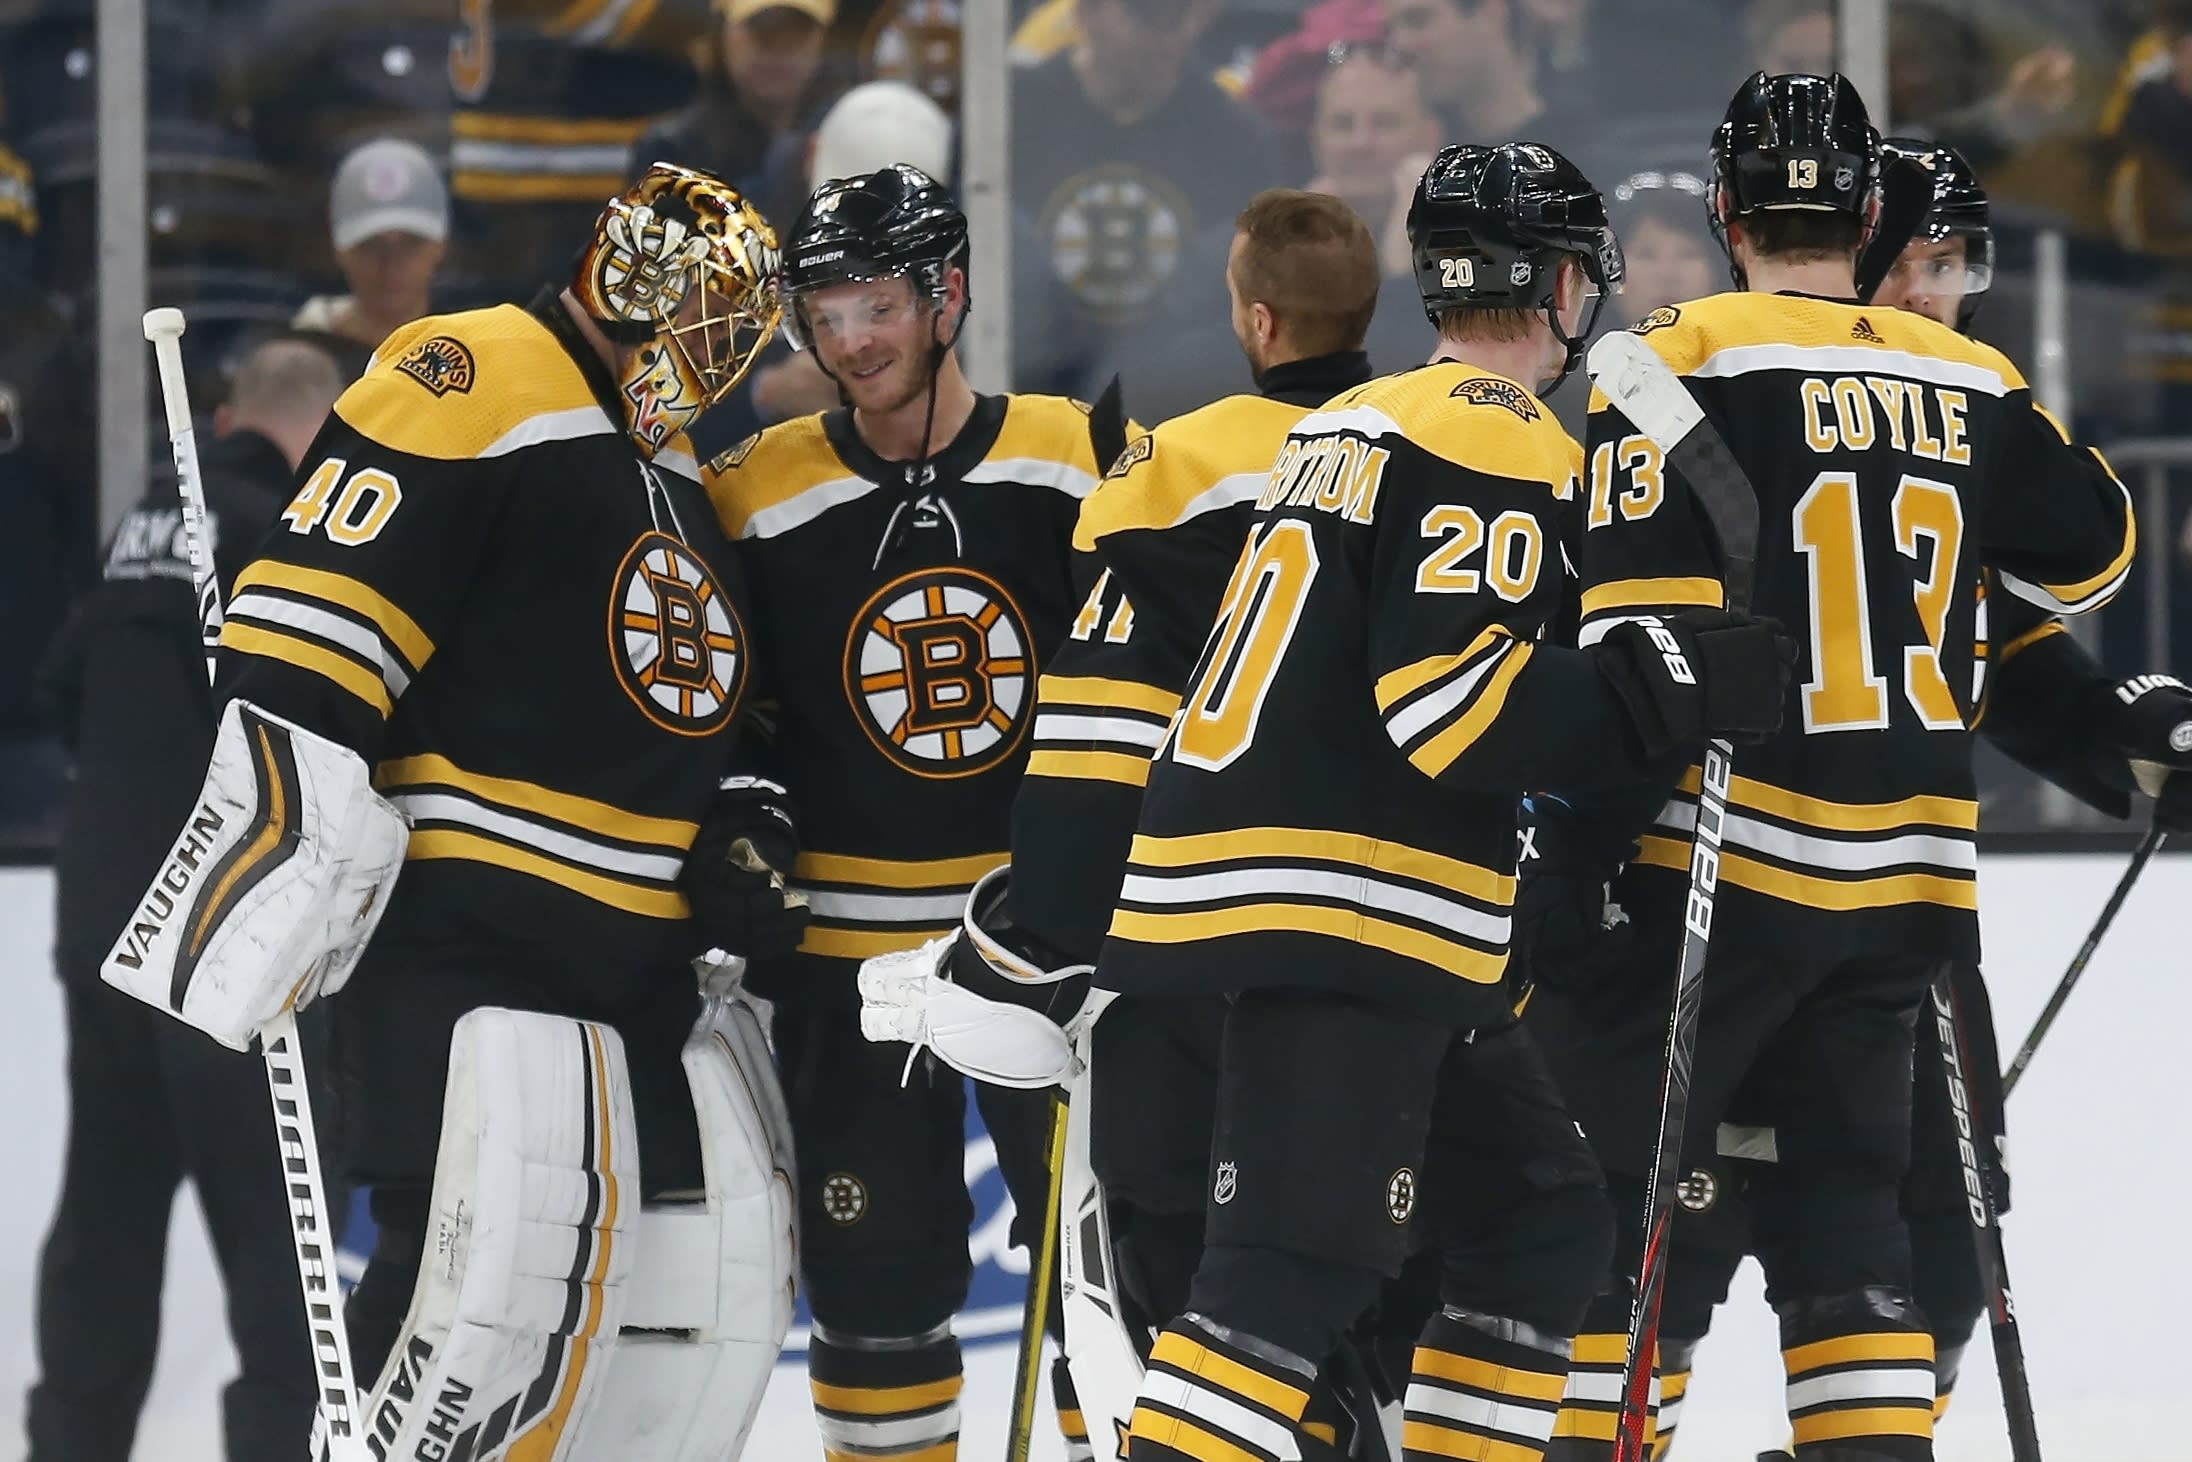 Bruins blank Blues 3-0 in 1st meeting since losing Cup final